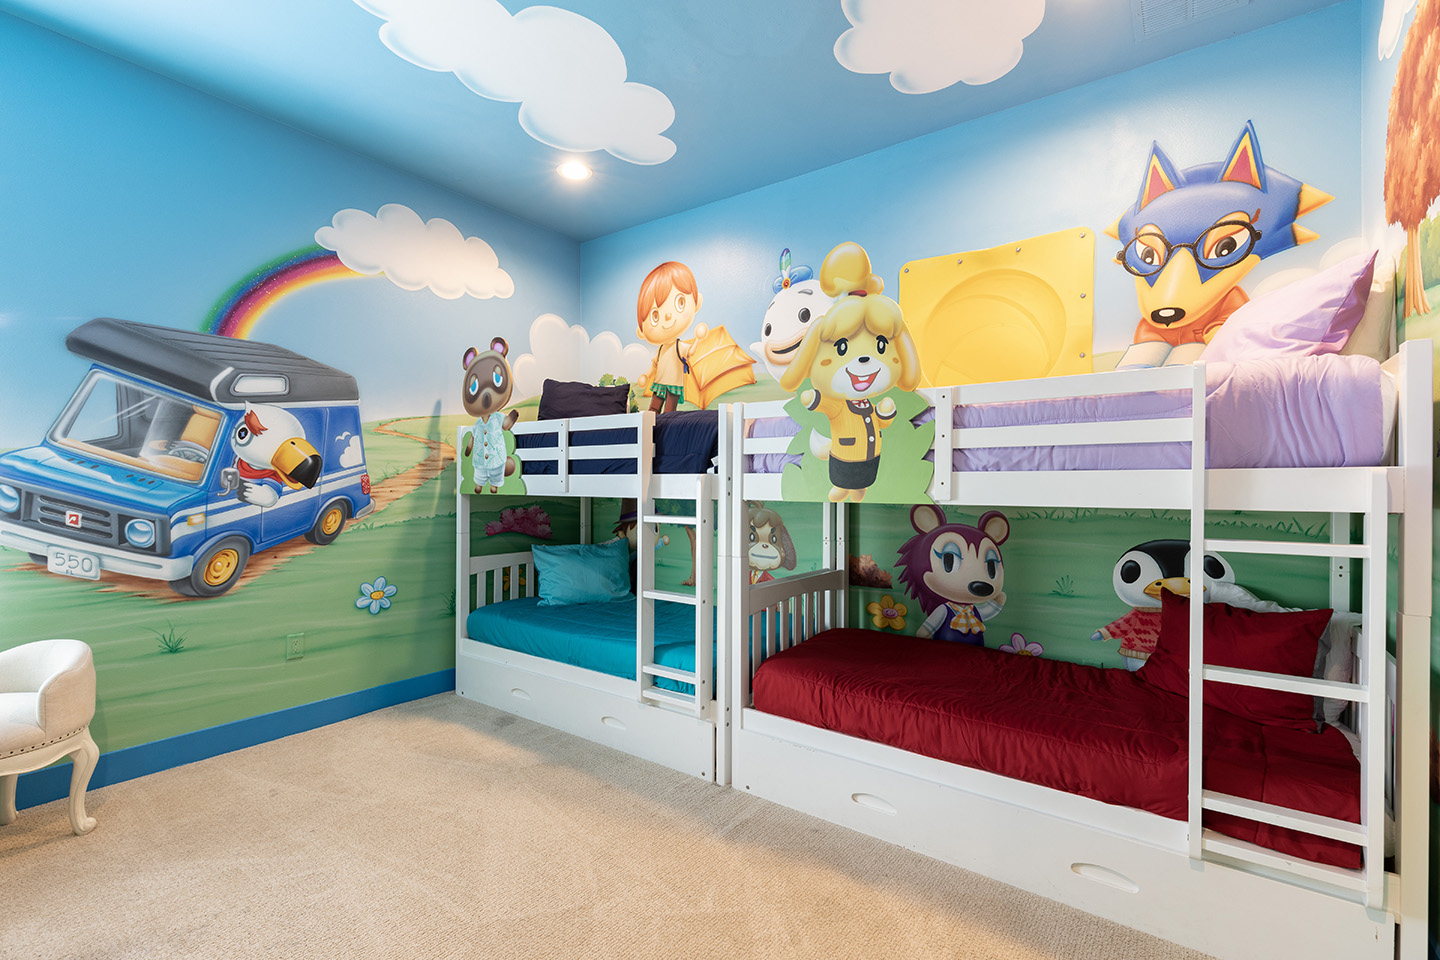 [amenities:Themed-Bedrooms:1] Themed Bedrooms